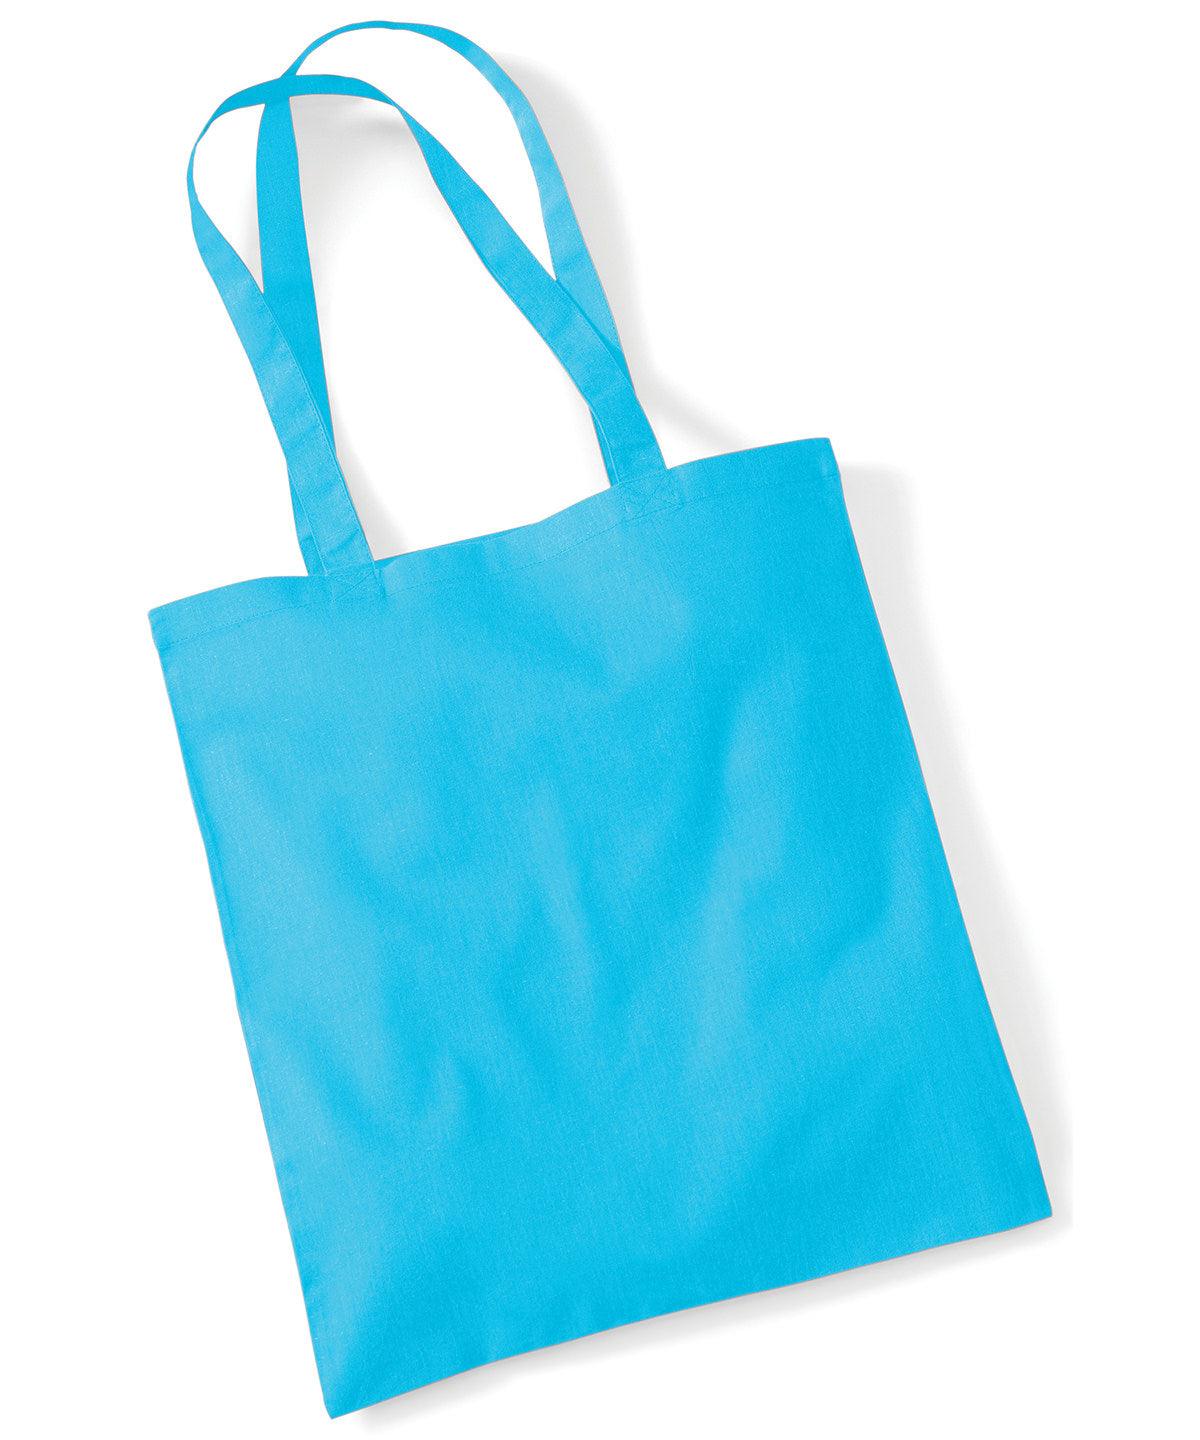 Surf Blue - Bag for life - long handles Bags Westford Mill Bags & Luggage, Crafting, Must Haves, Rebrandable Schoolwear Centres